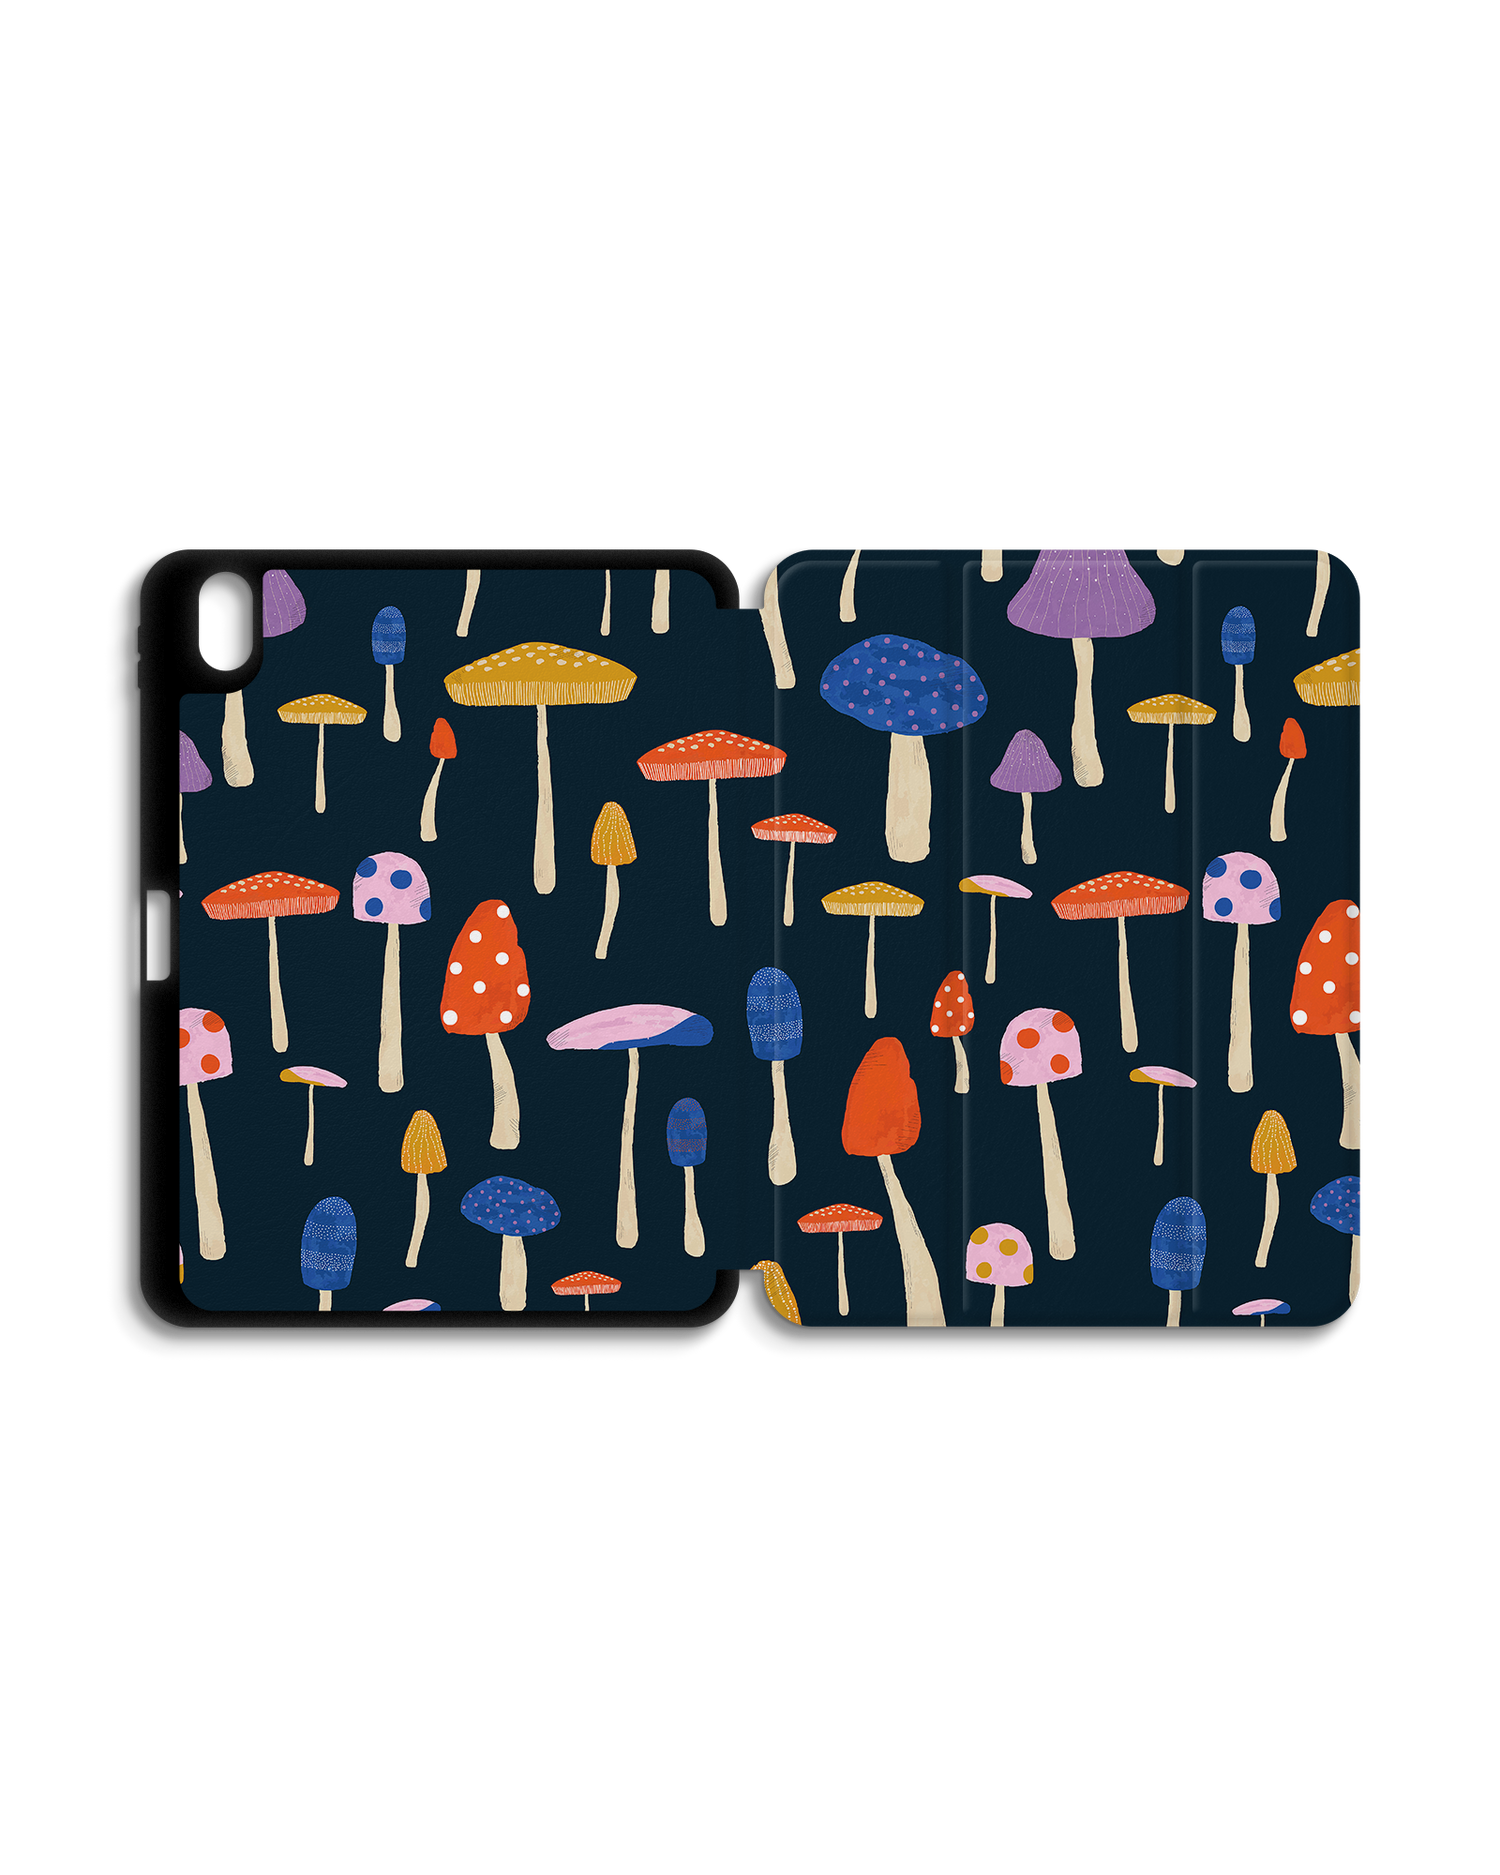 Mushroom Delights iPad Case with Pencil Holder for Apple iPad (10th Generation): Opened exterior view